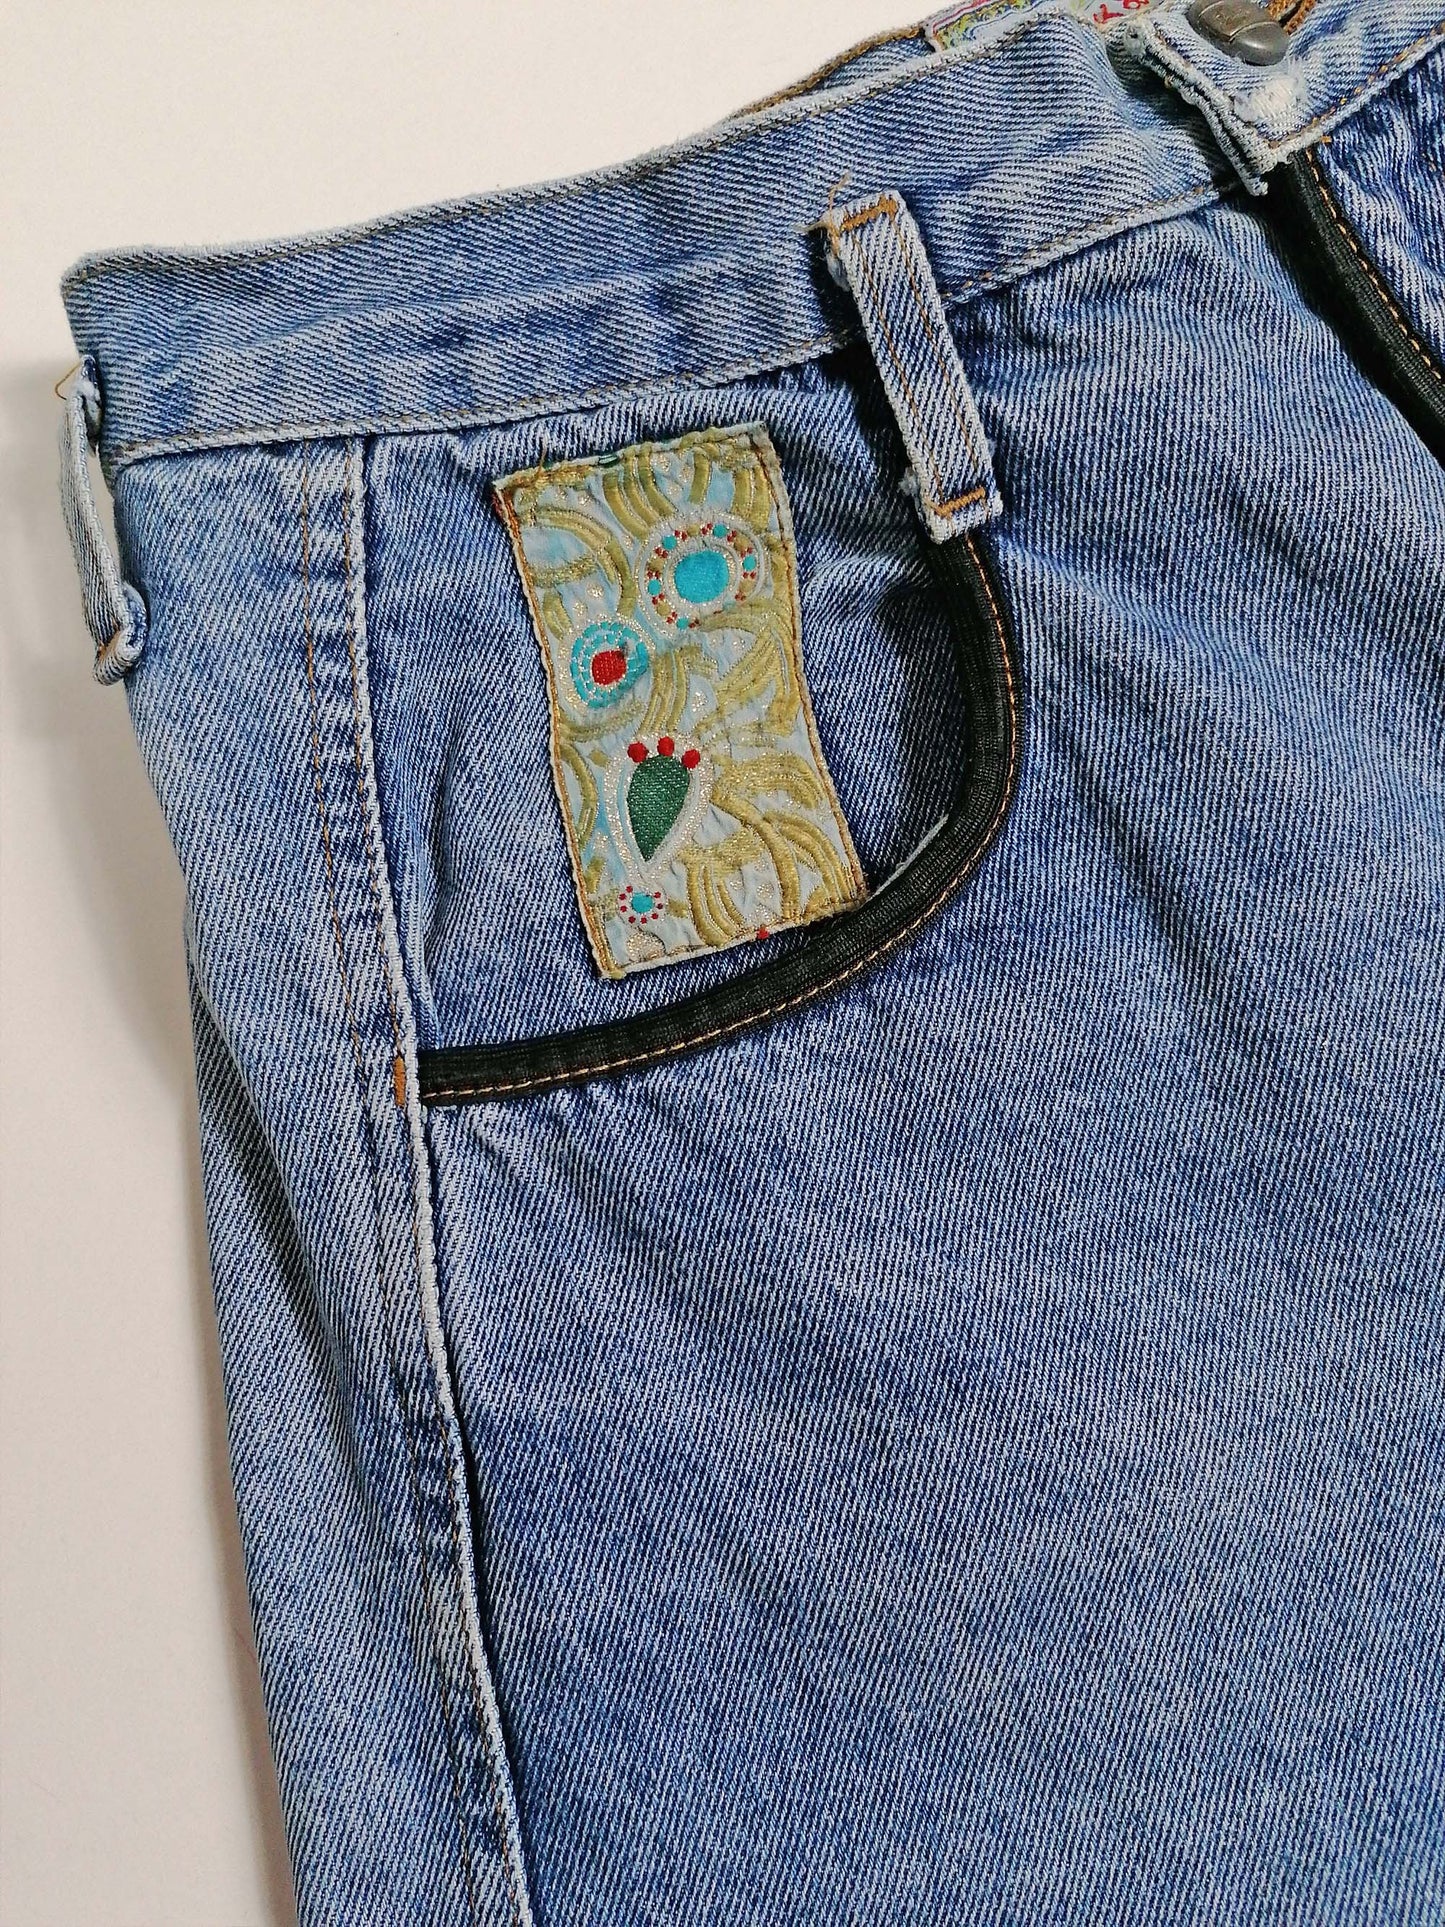 80's JACK & SONS High Waist Embroidery Patch Baggy Jeans - M-L (32")